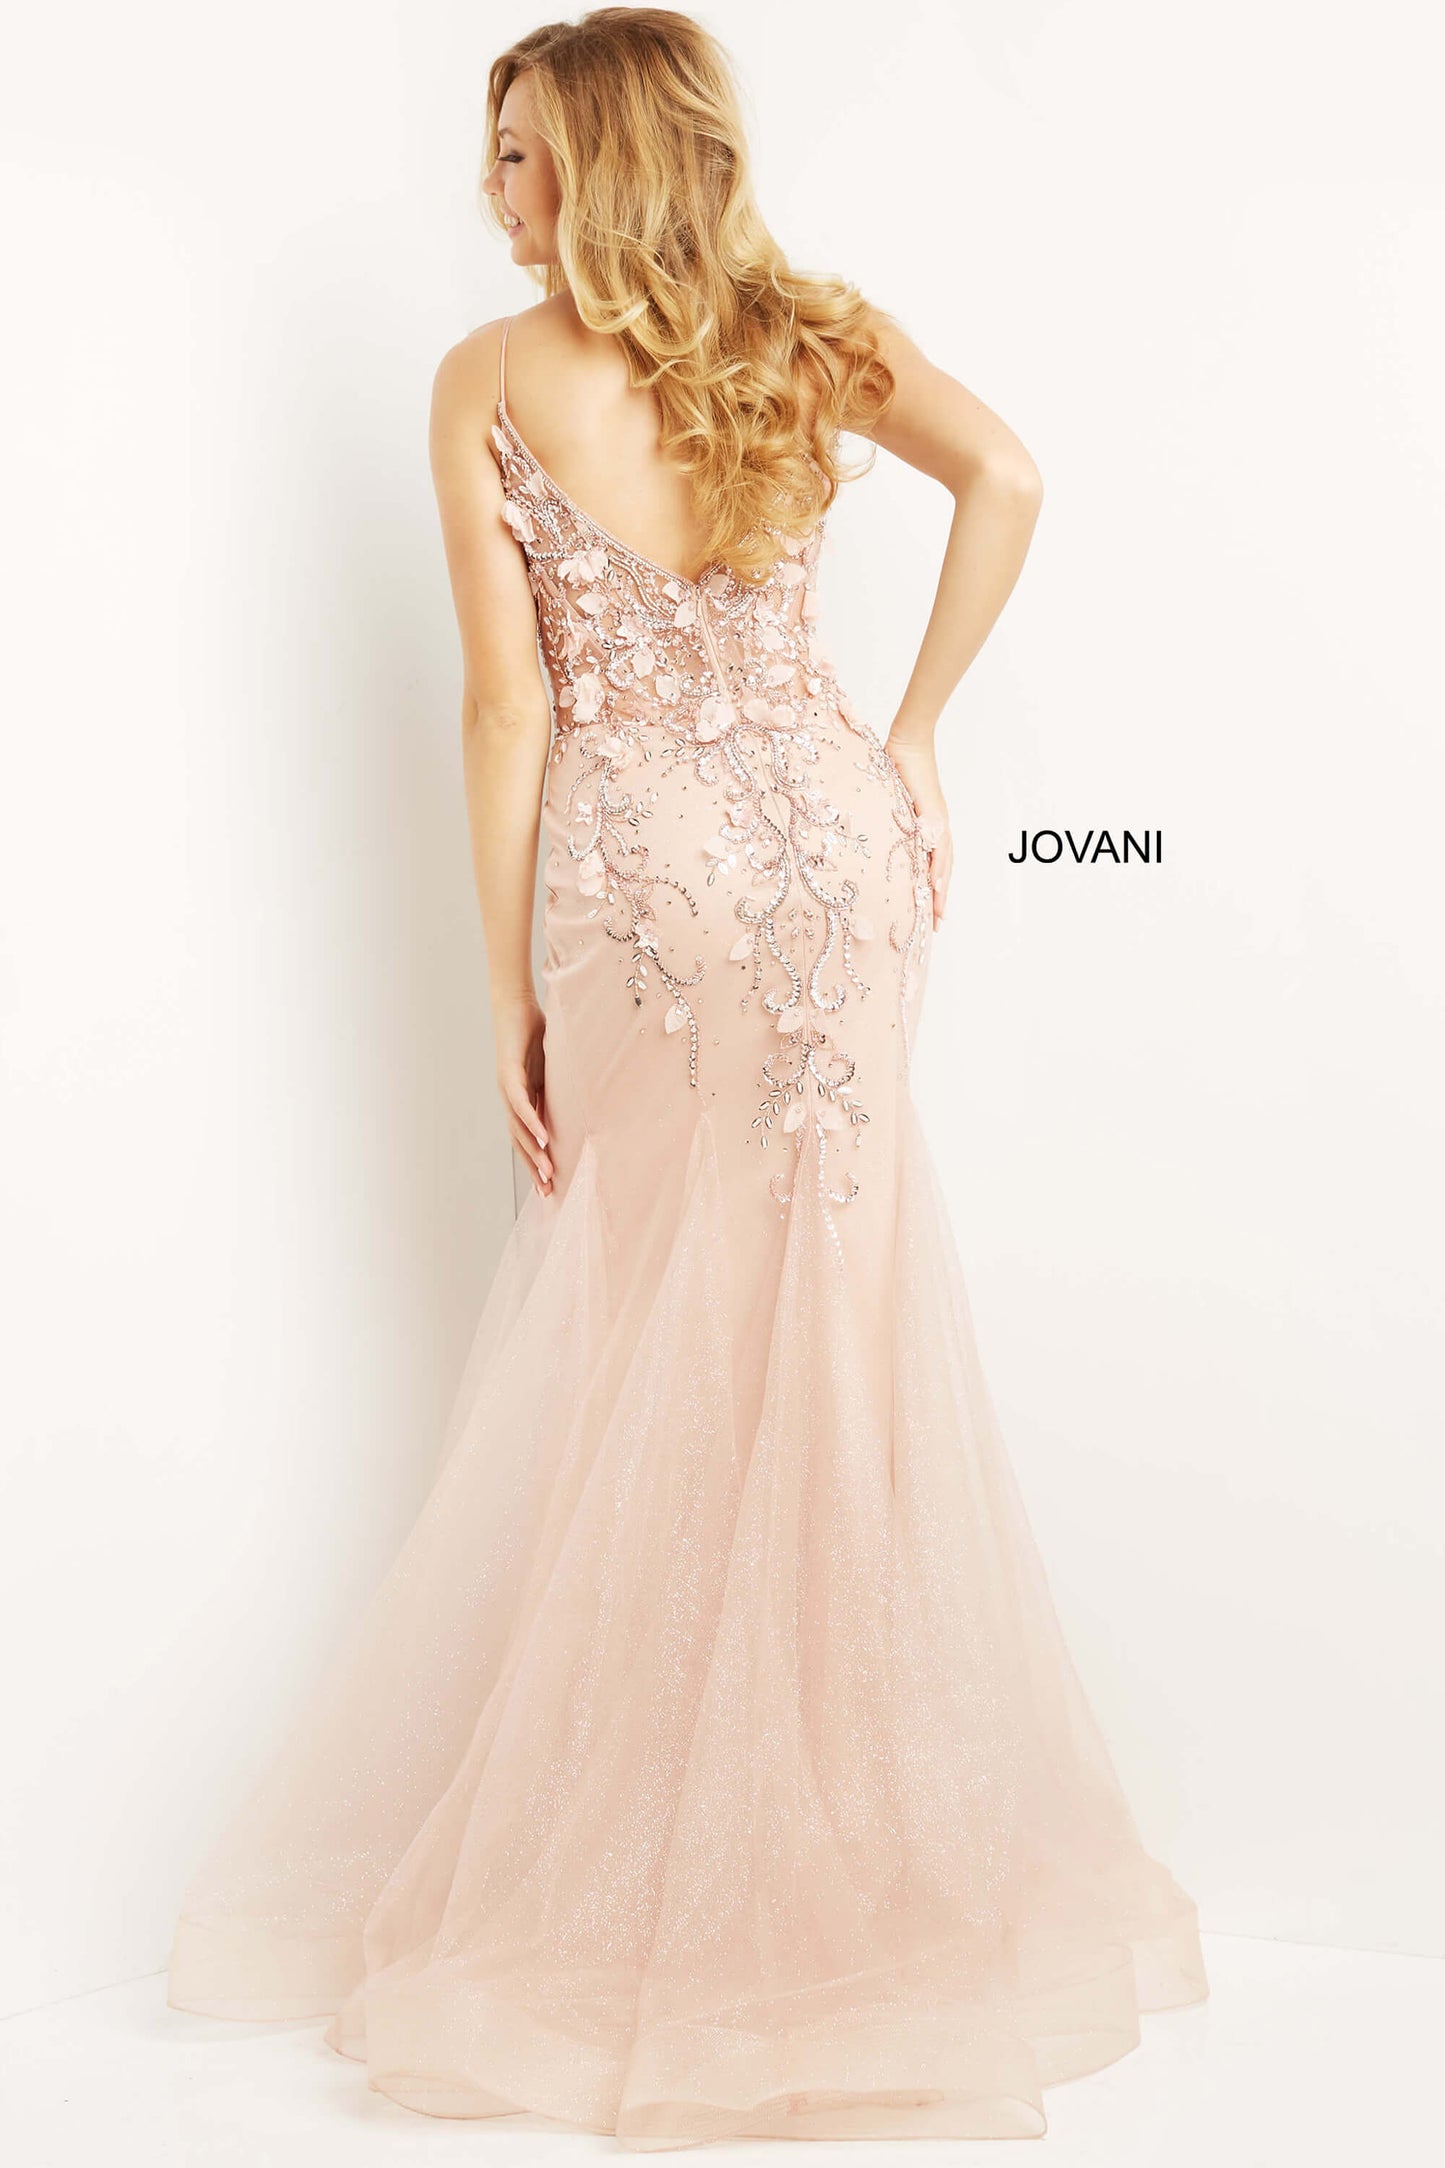 Jovani 05839 Long Mermaids Prom Pageant Gown Formal Dress Floral V Neck   Available Size-00-24  Available Color- Blush, Burgundy, Charcoal, Navy/Navy, Nude/Silver, Periwinkle, Red, White/Gold/Silver, White/Black/Silver, White